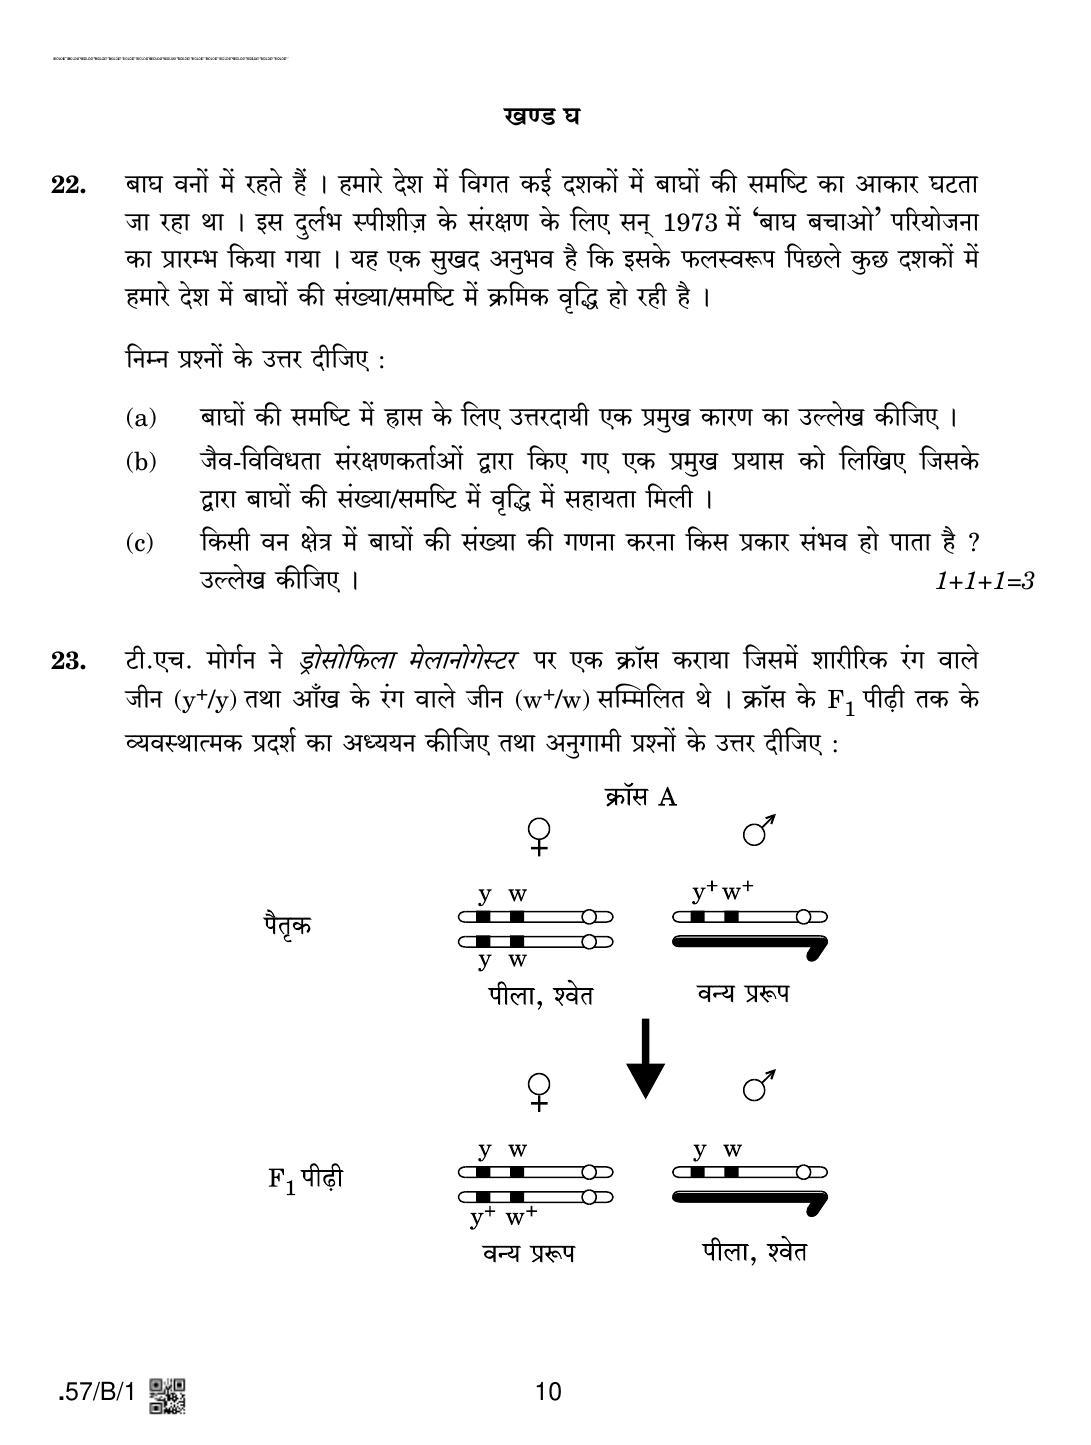 CBSE Class 12 57-C-1 - Biology 2020 Compartment Question Paper - Page 10